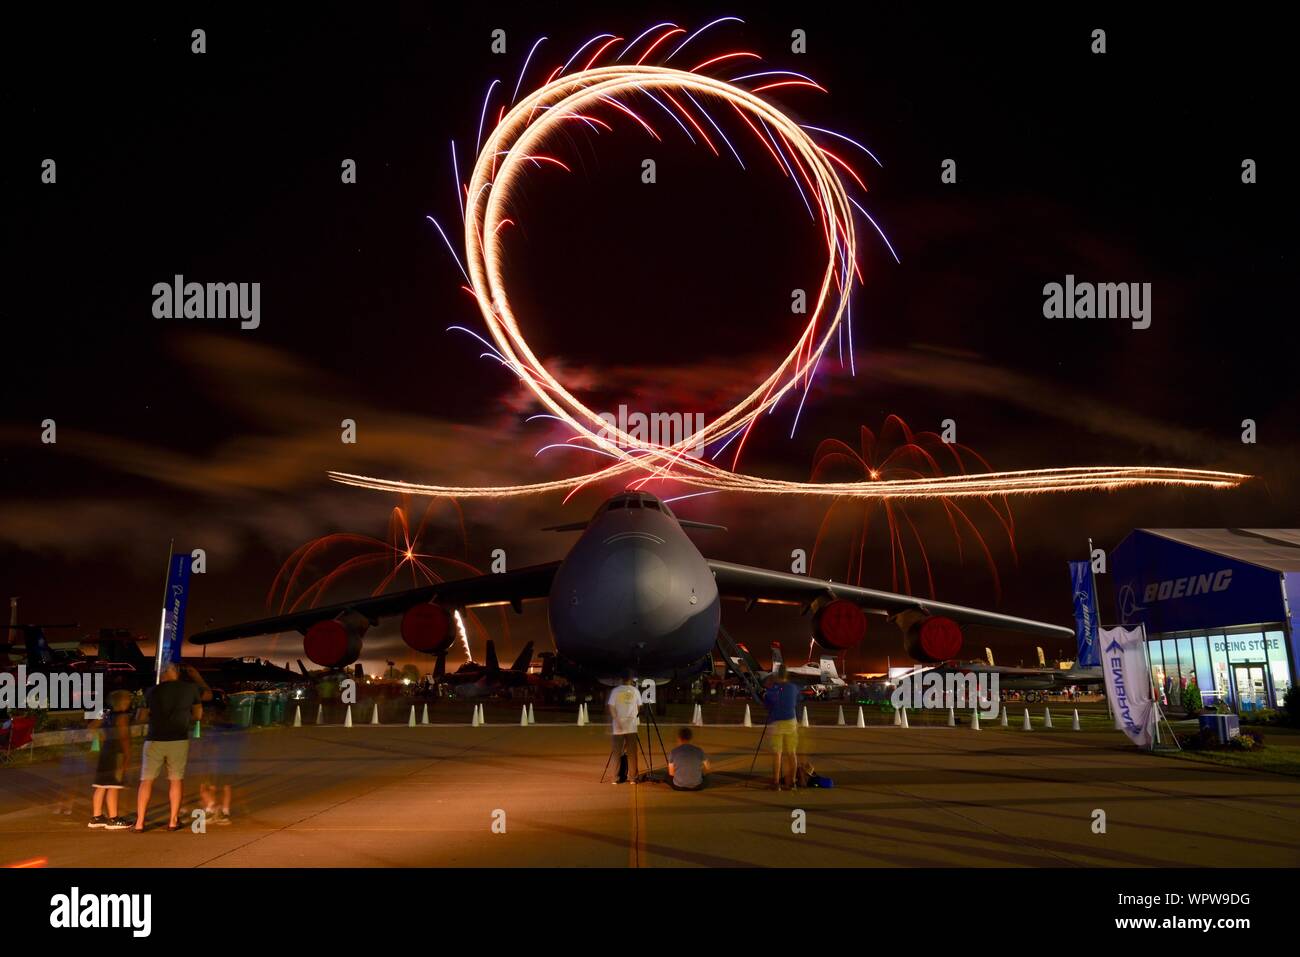 Spectacular fireworks explode behind massive Lockheed C-5M Super Galaxy aircraft parked in Boeing Plaza of EAA AirVenture, Oshkosh, Wisconsin, USA Stock Photo